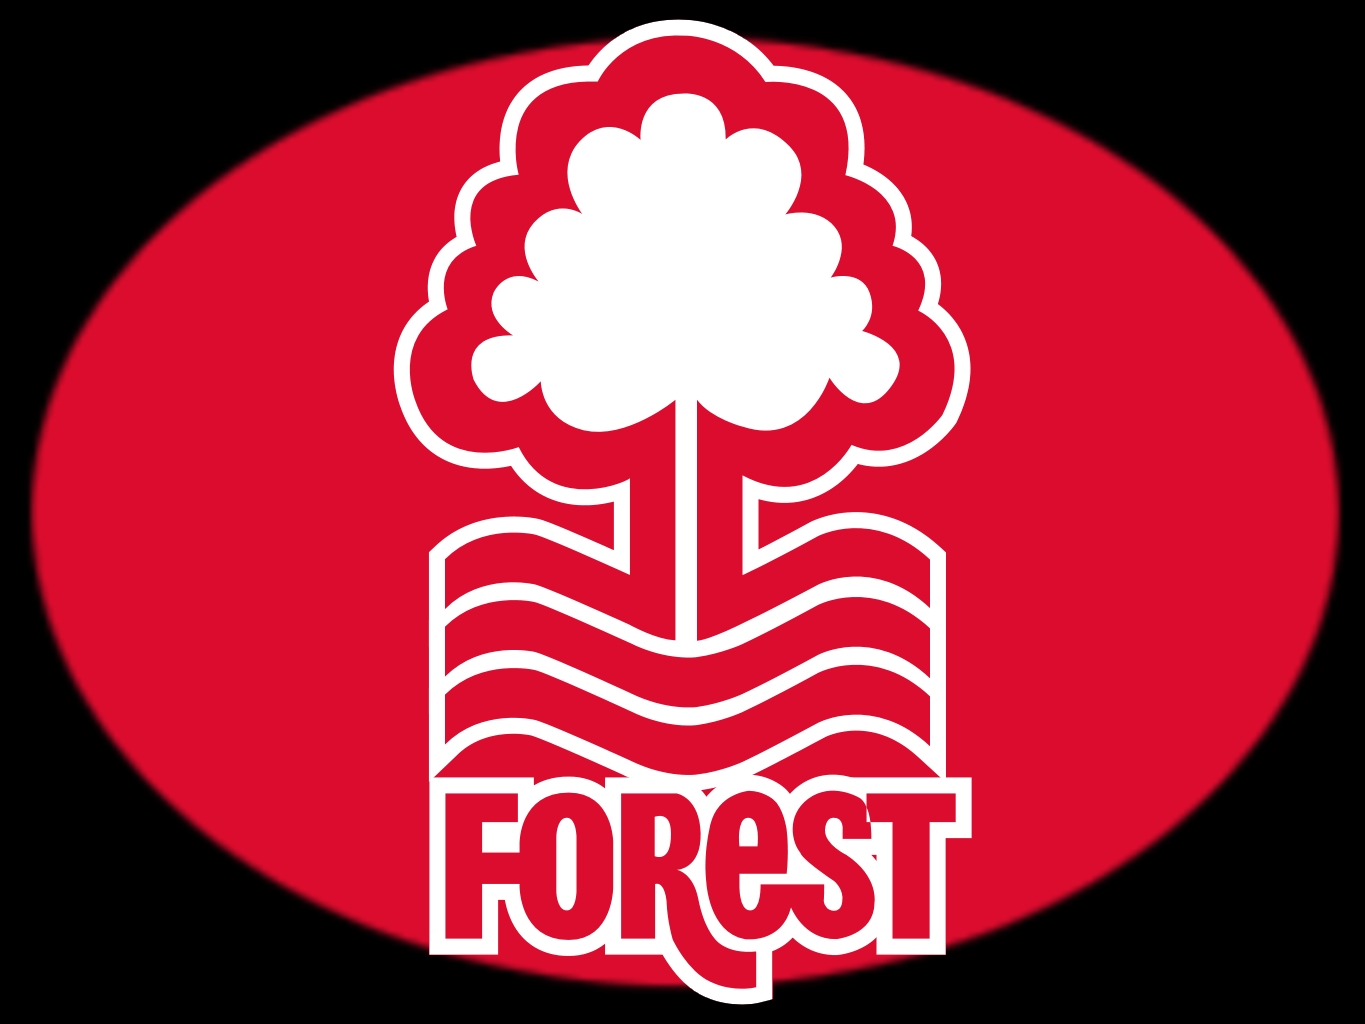 Download this Desconhecidos Nottingham Forest Football Club picture